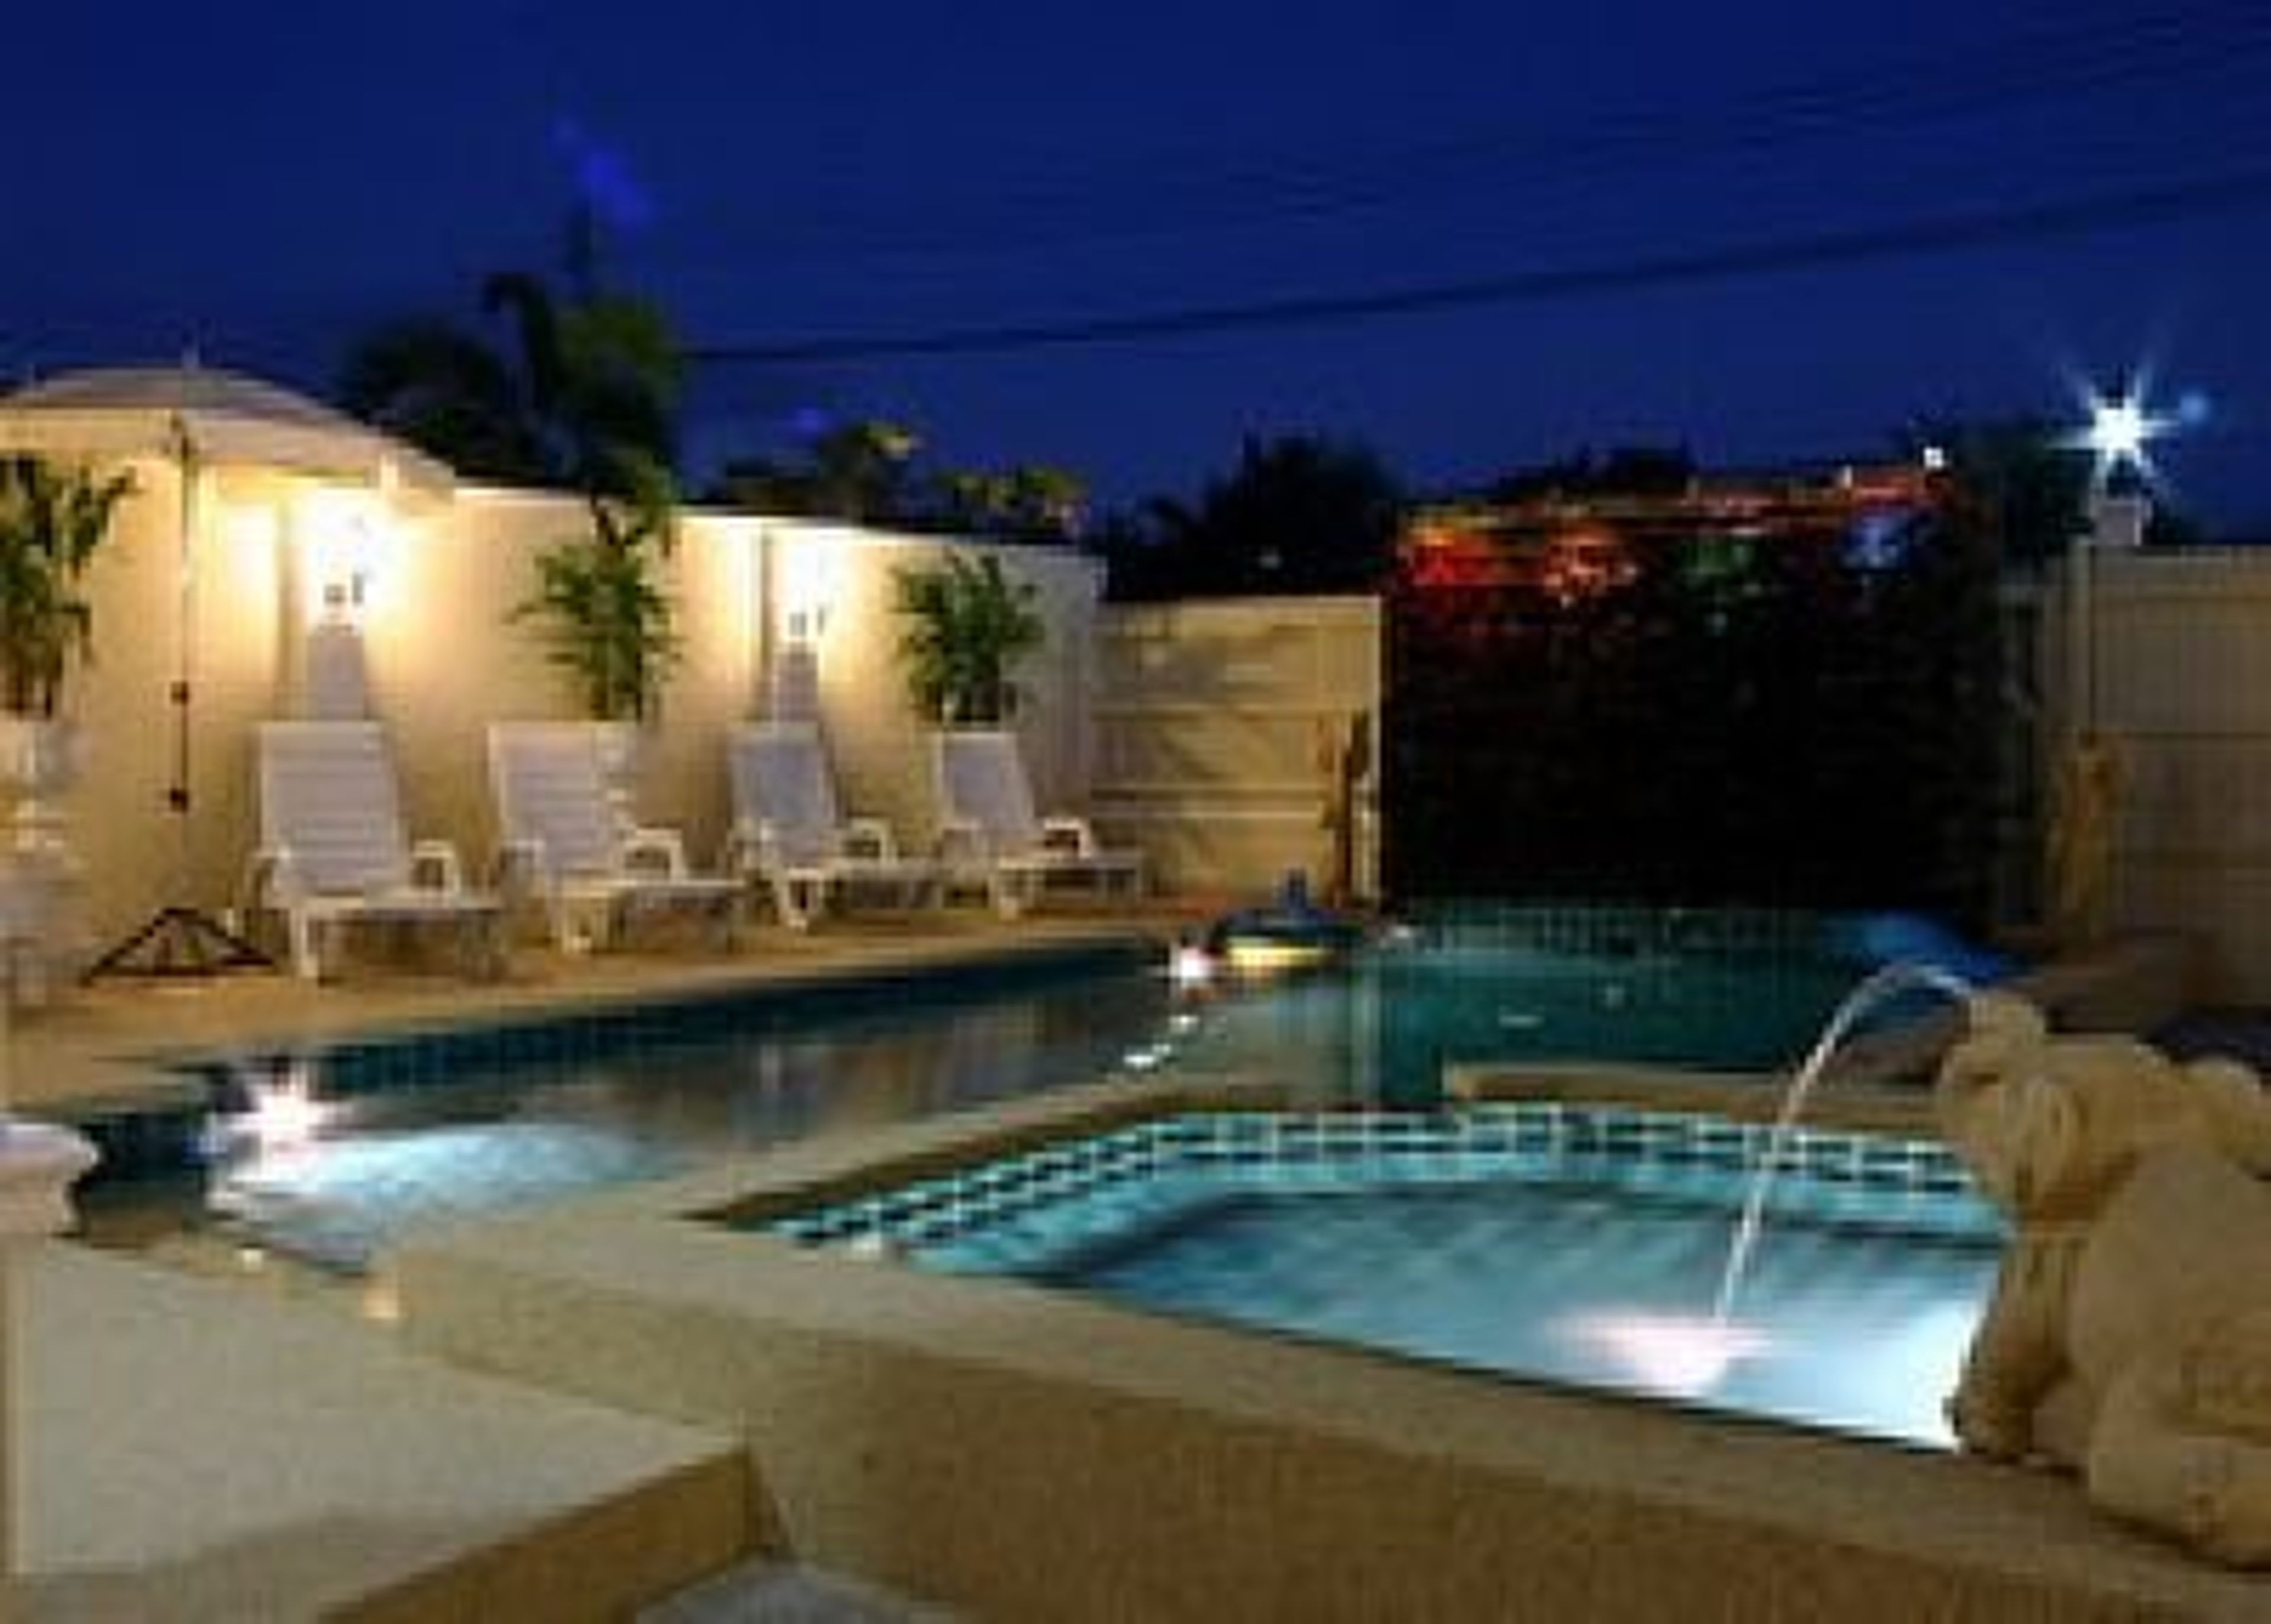 Swimming Pool At Night With Outside Lighting!